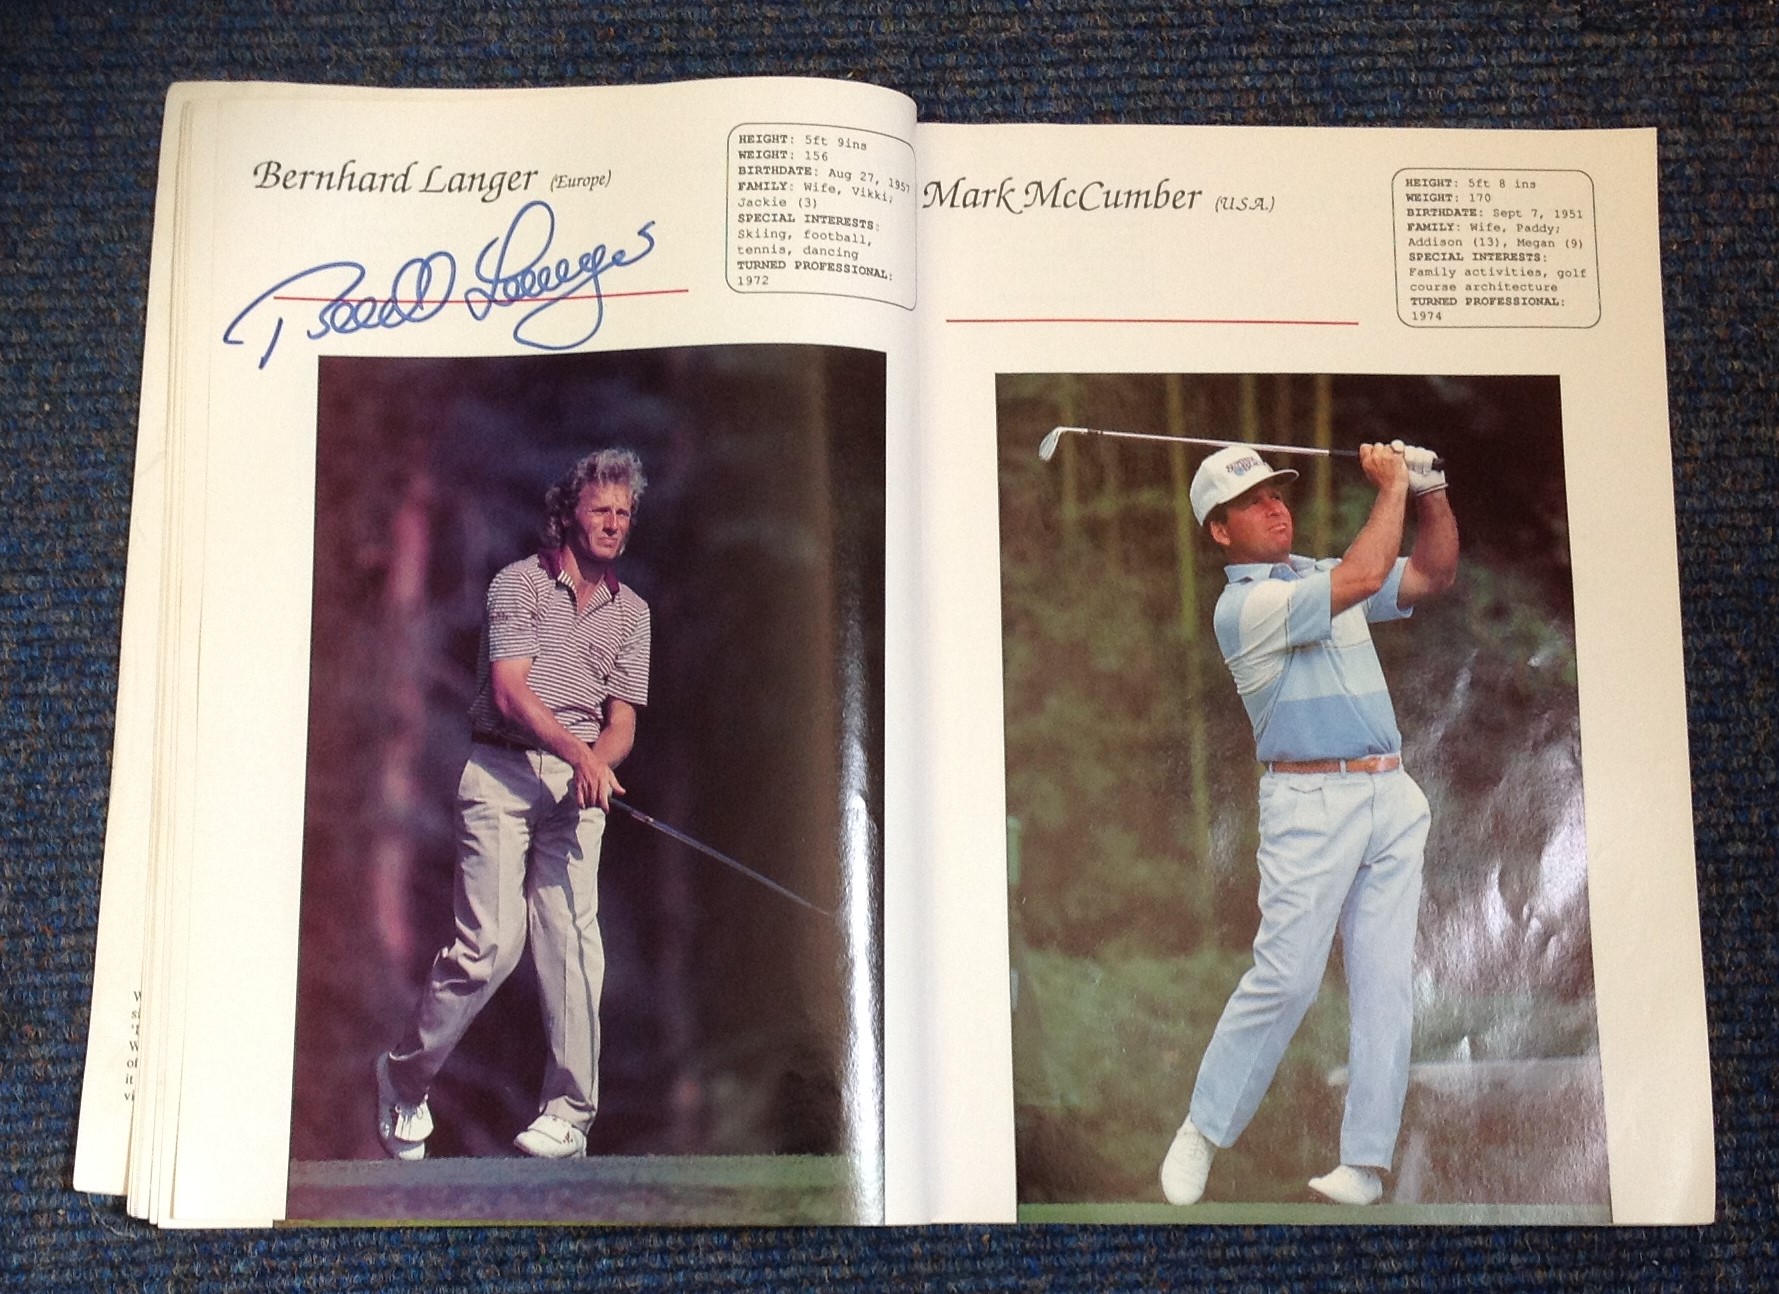 Golf 1989 Ryder Cup signed Golfers News paperback book 12 signatures includes legends of the game - Image 3 of 5